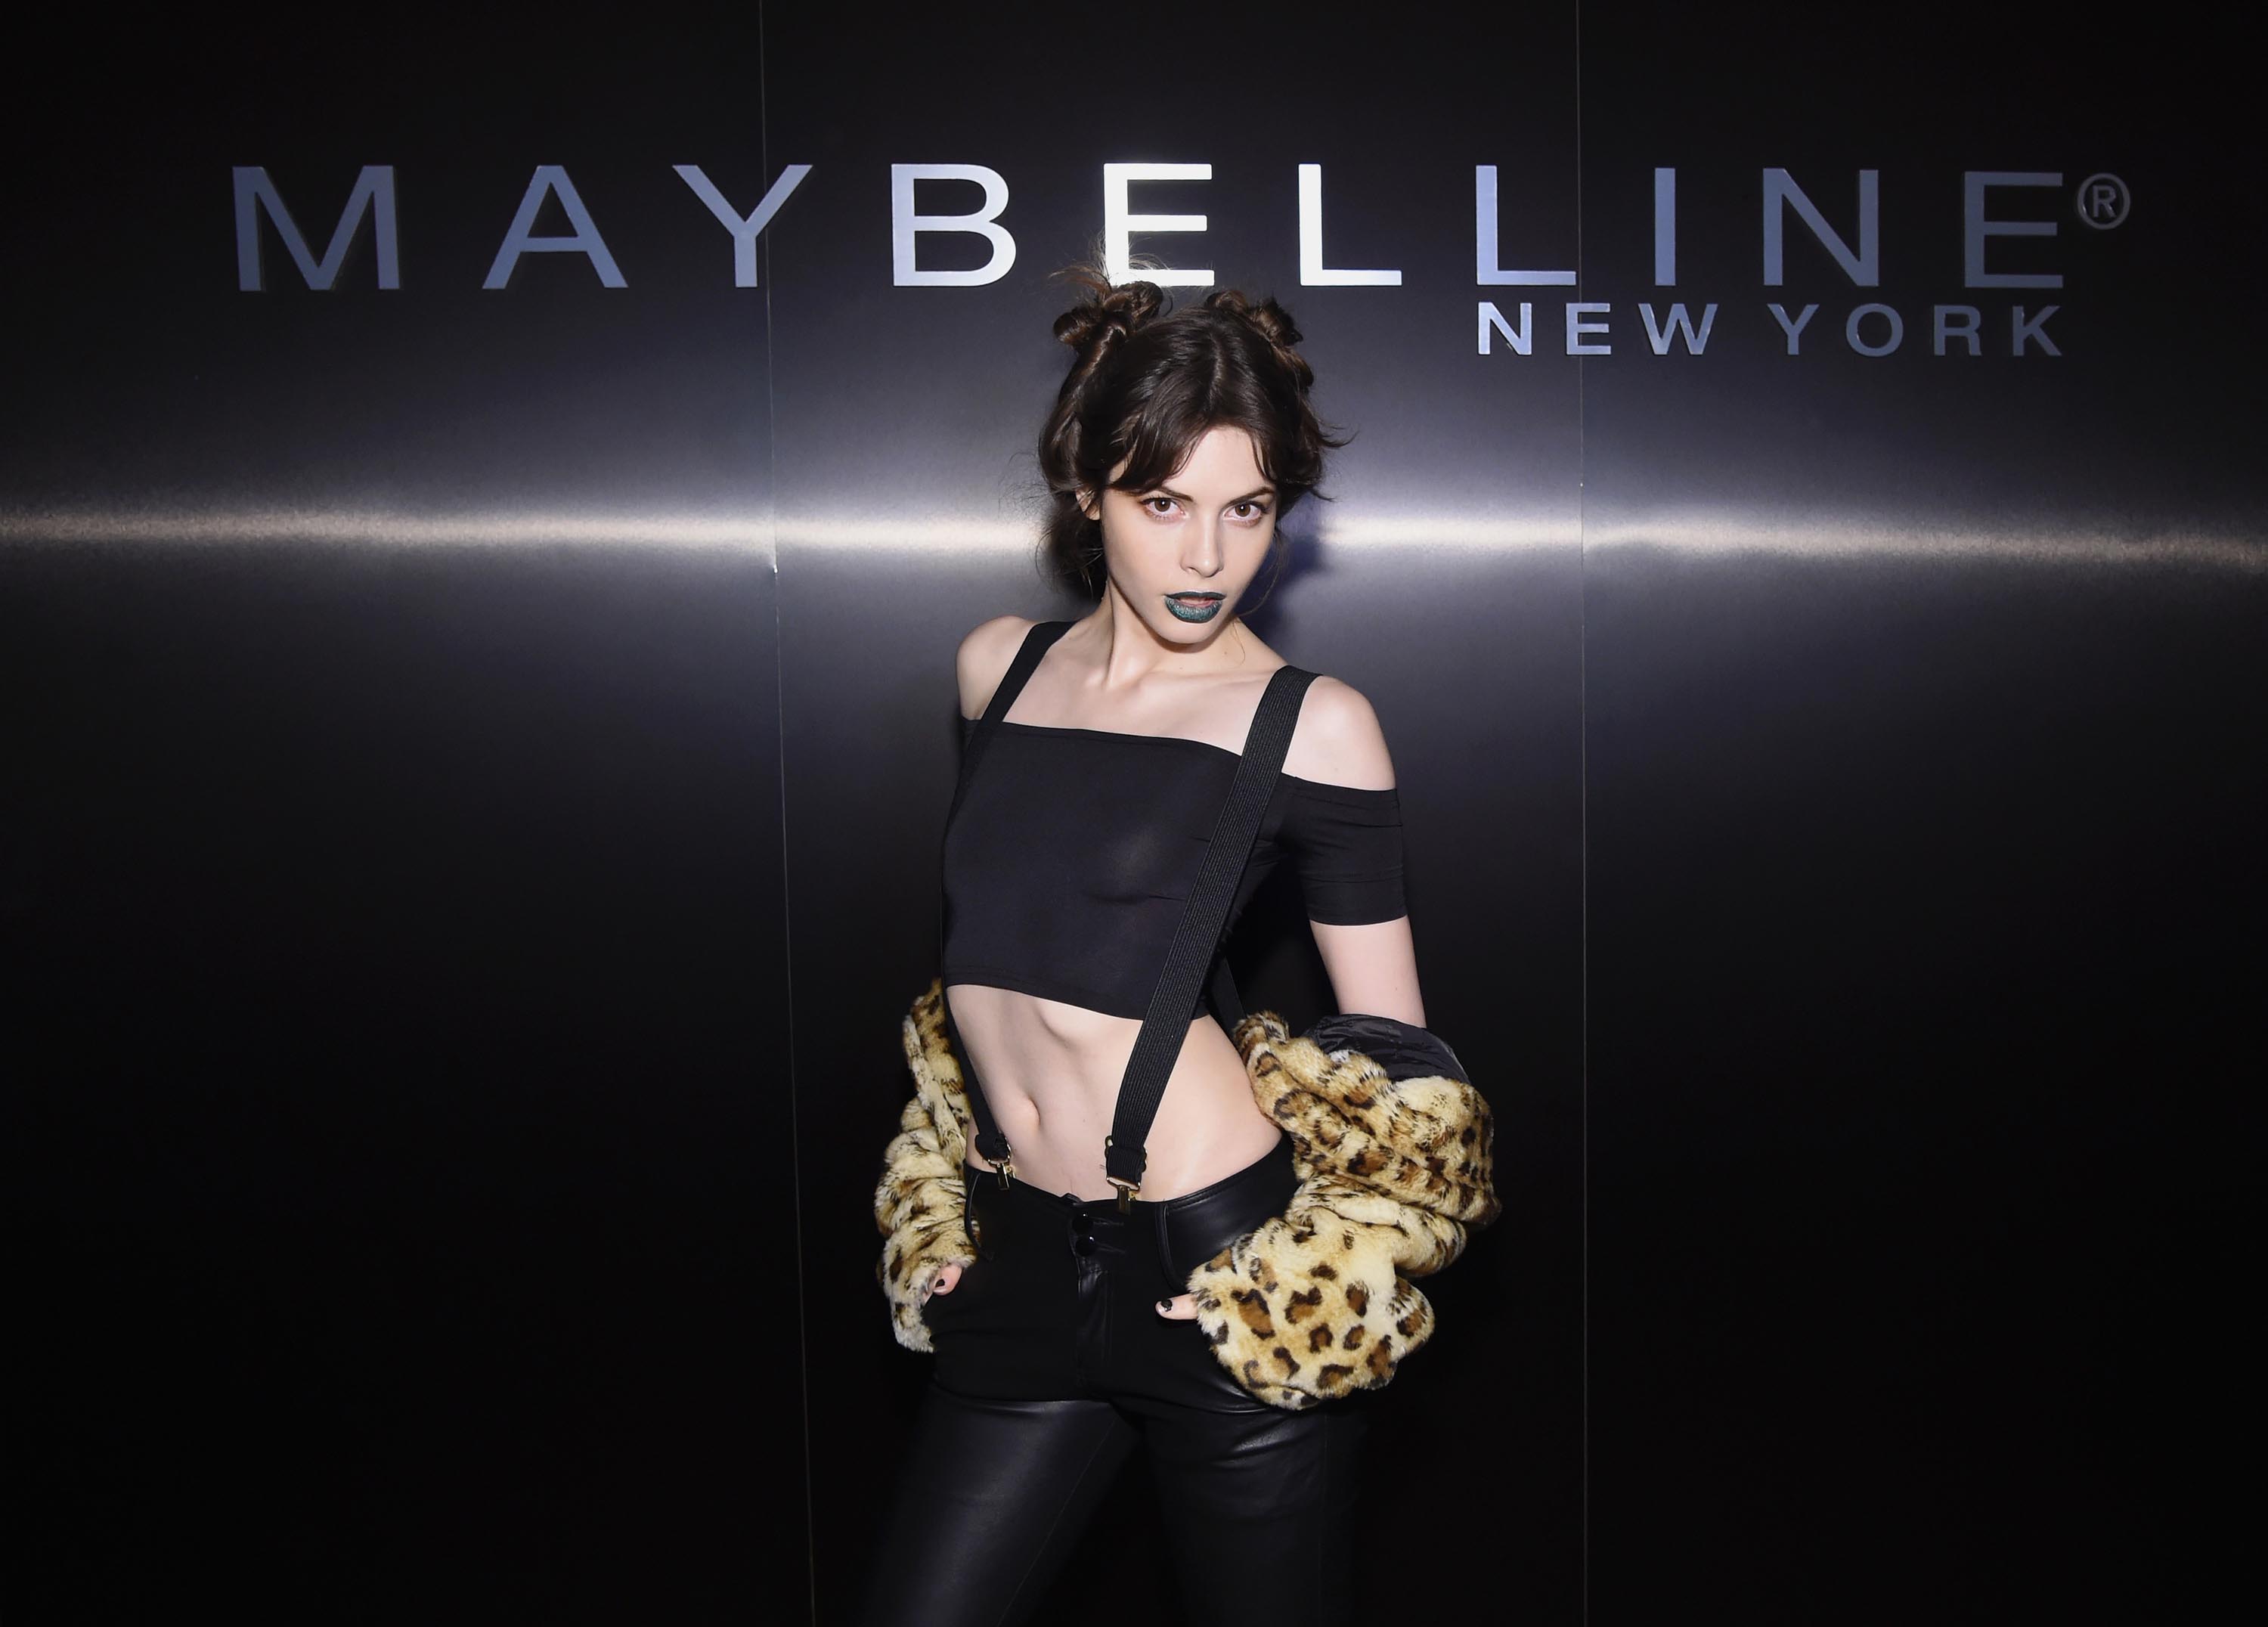 Kemp Muhl attends Maybelline NYFW Welcome Party